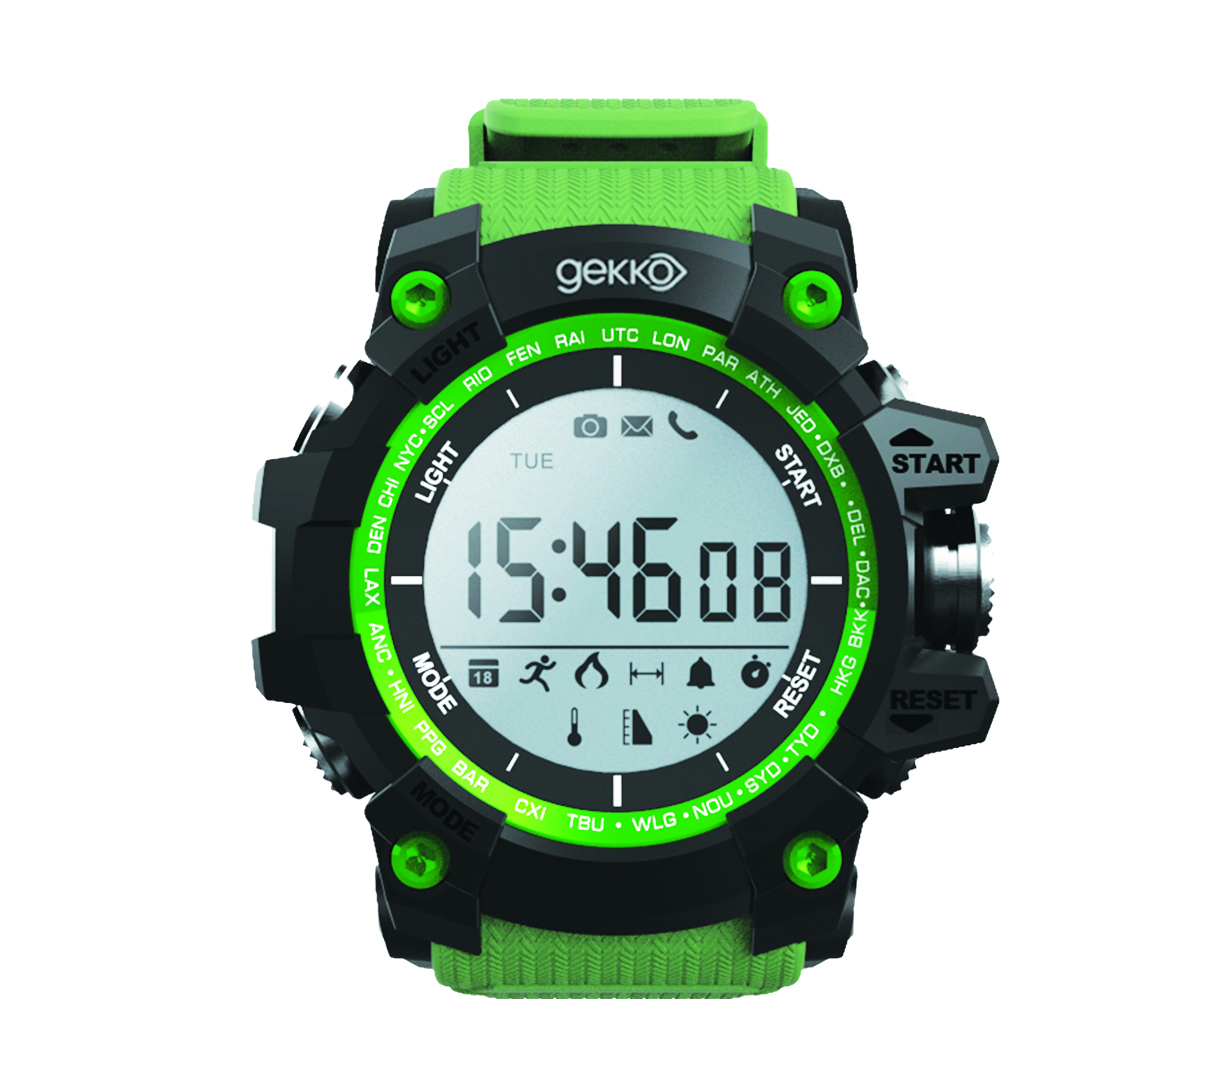 Sanzar Futureteq launches the Gekko GX1 – Hybrid Smartwatch :: Smart on the inside, Traditional on the outside